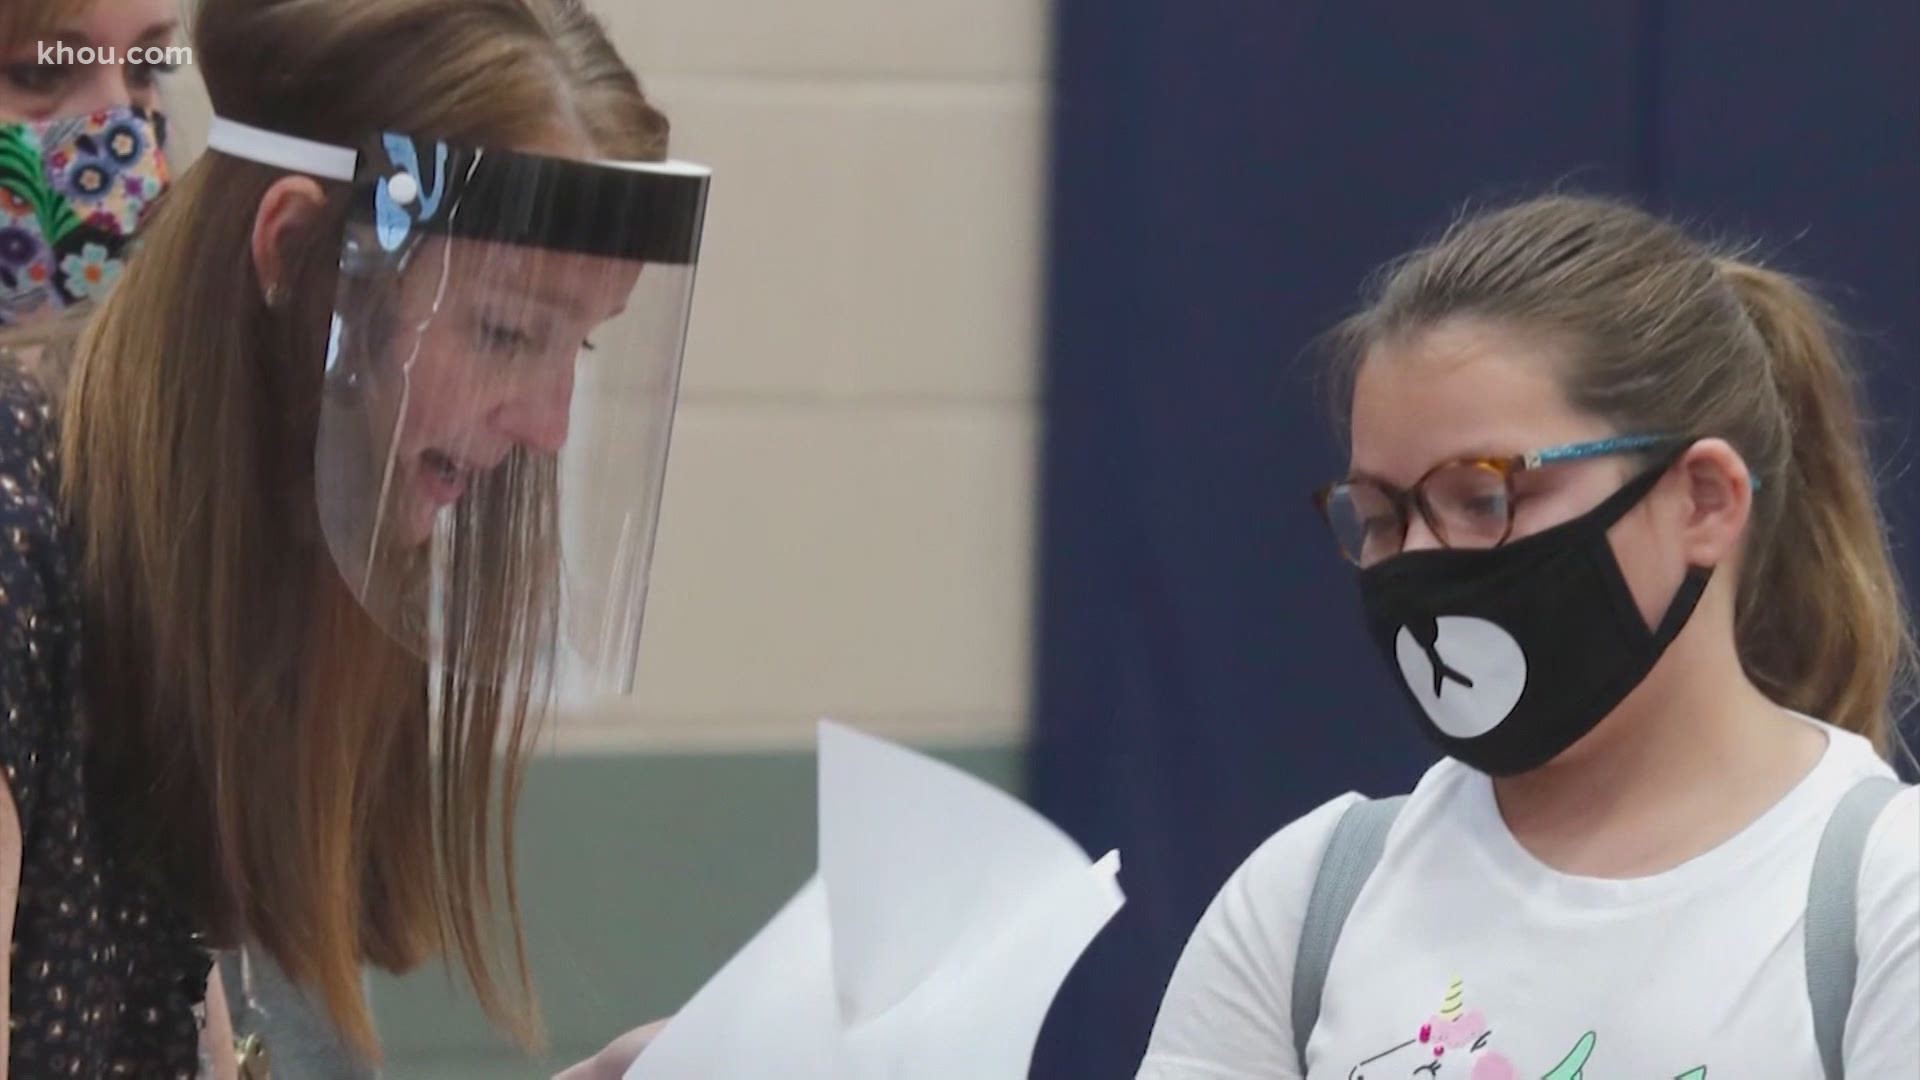 The TEA says face shields may be used in some circumstances despite guidance from health experts.